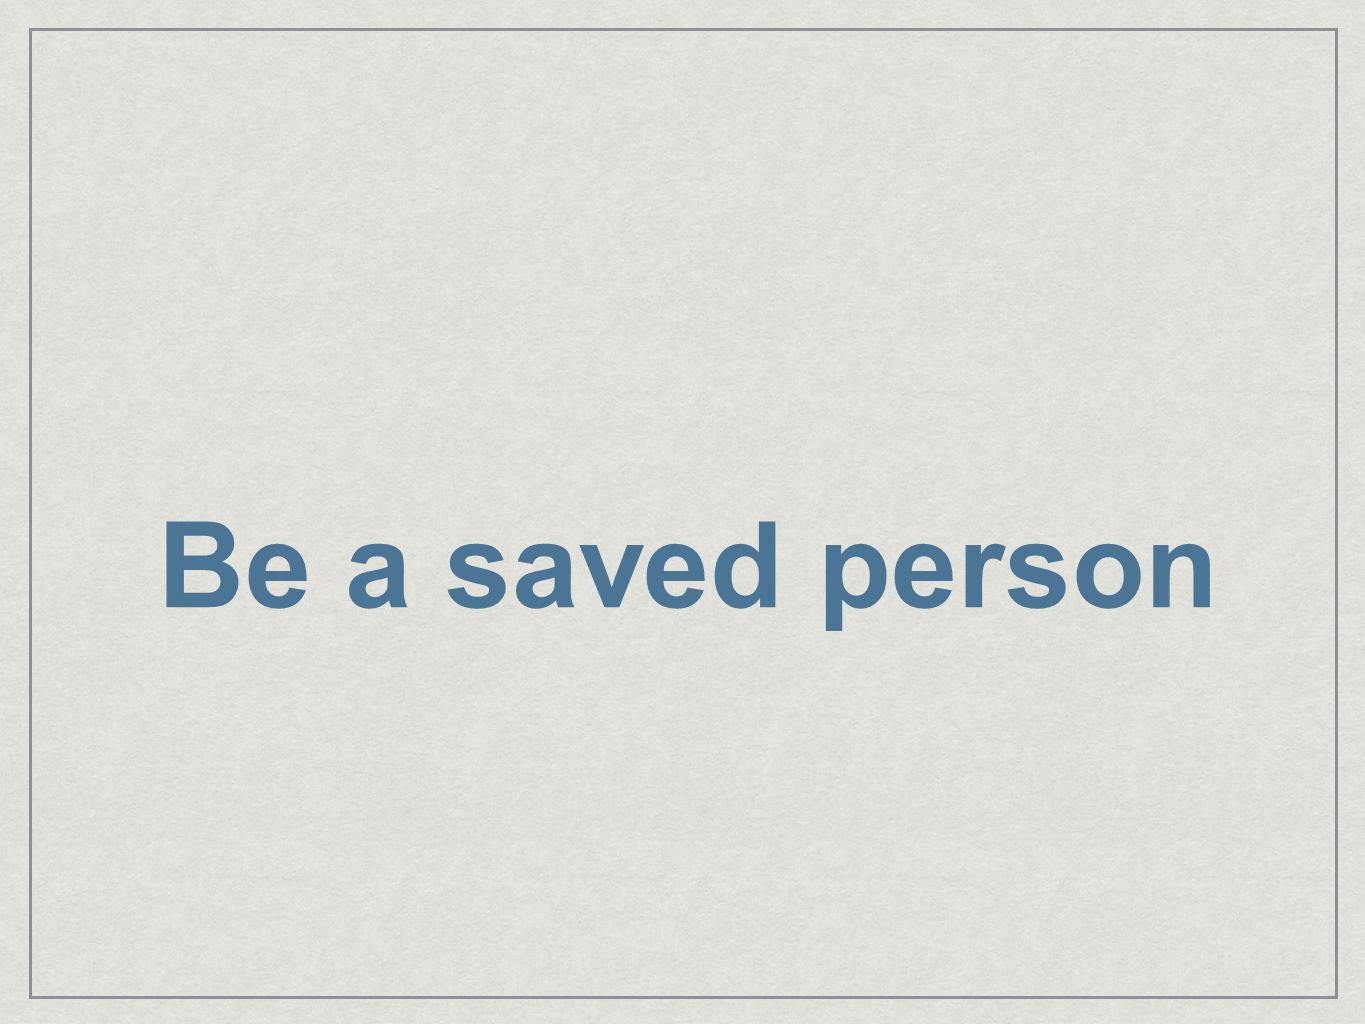 Be a saved person